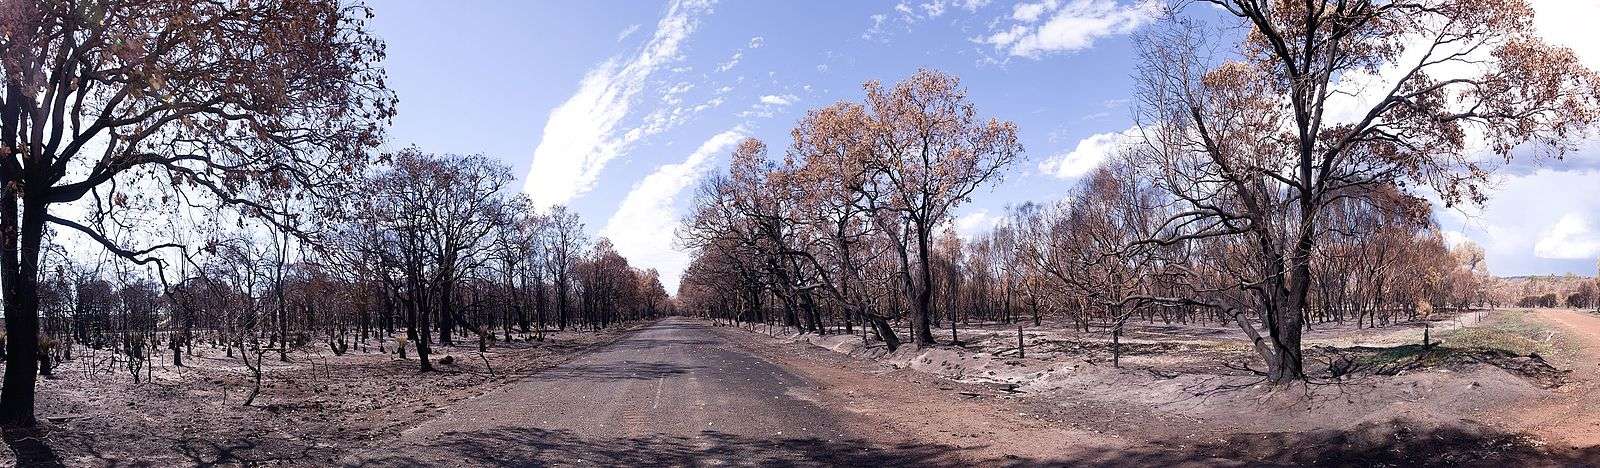 a central road leading nto the distance with blackened remains of bush land following a fire